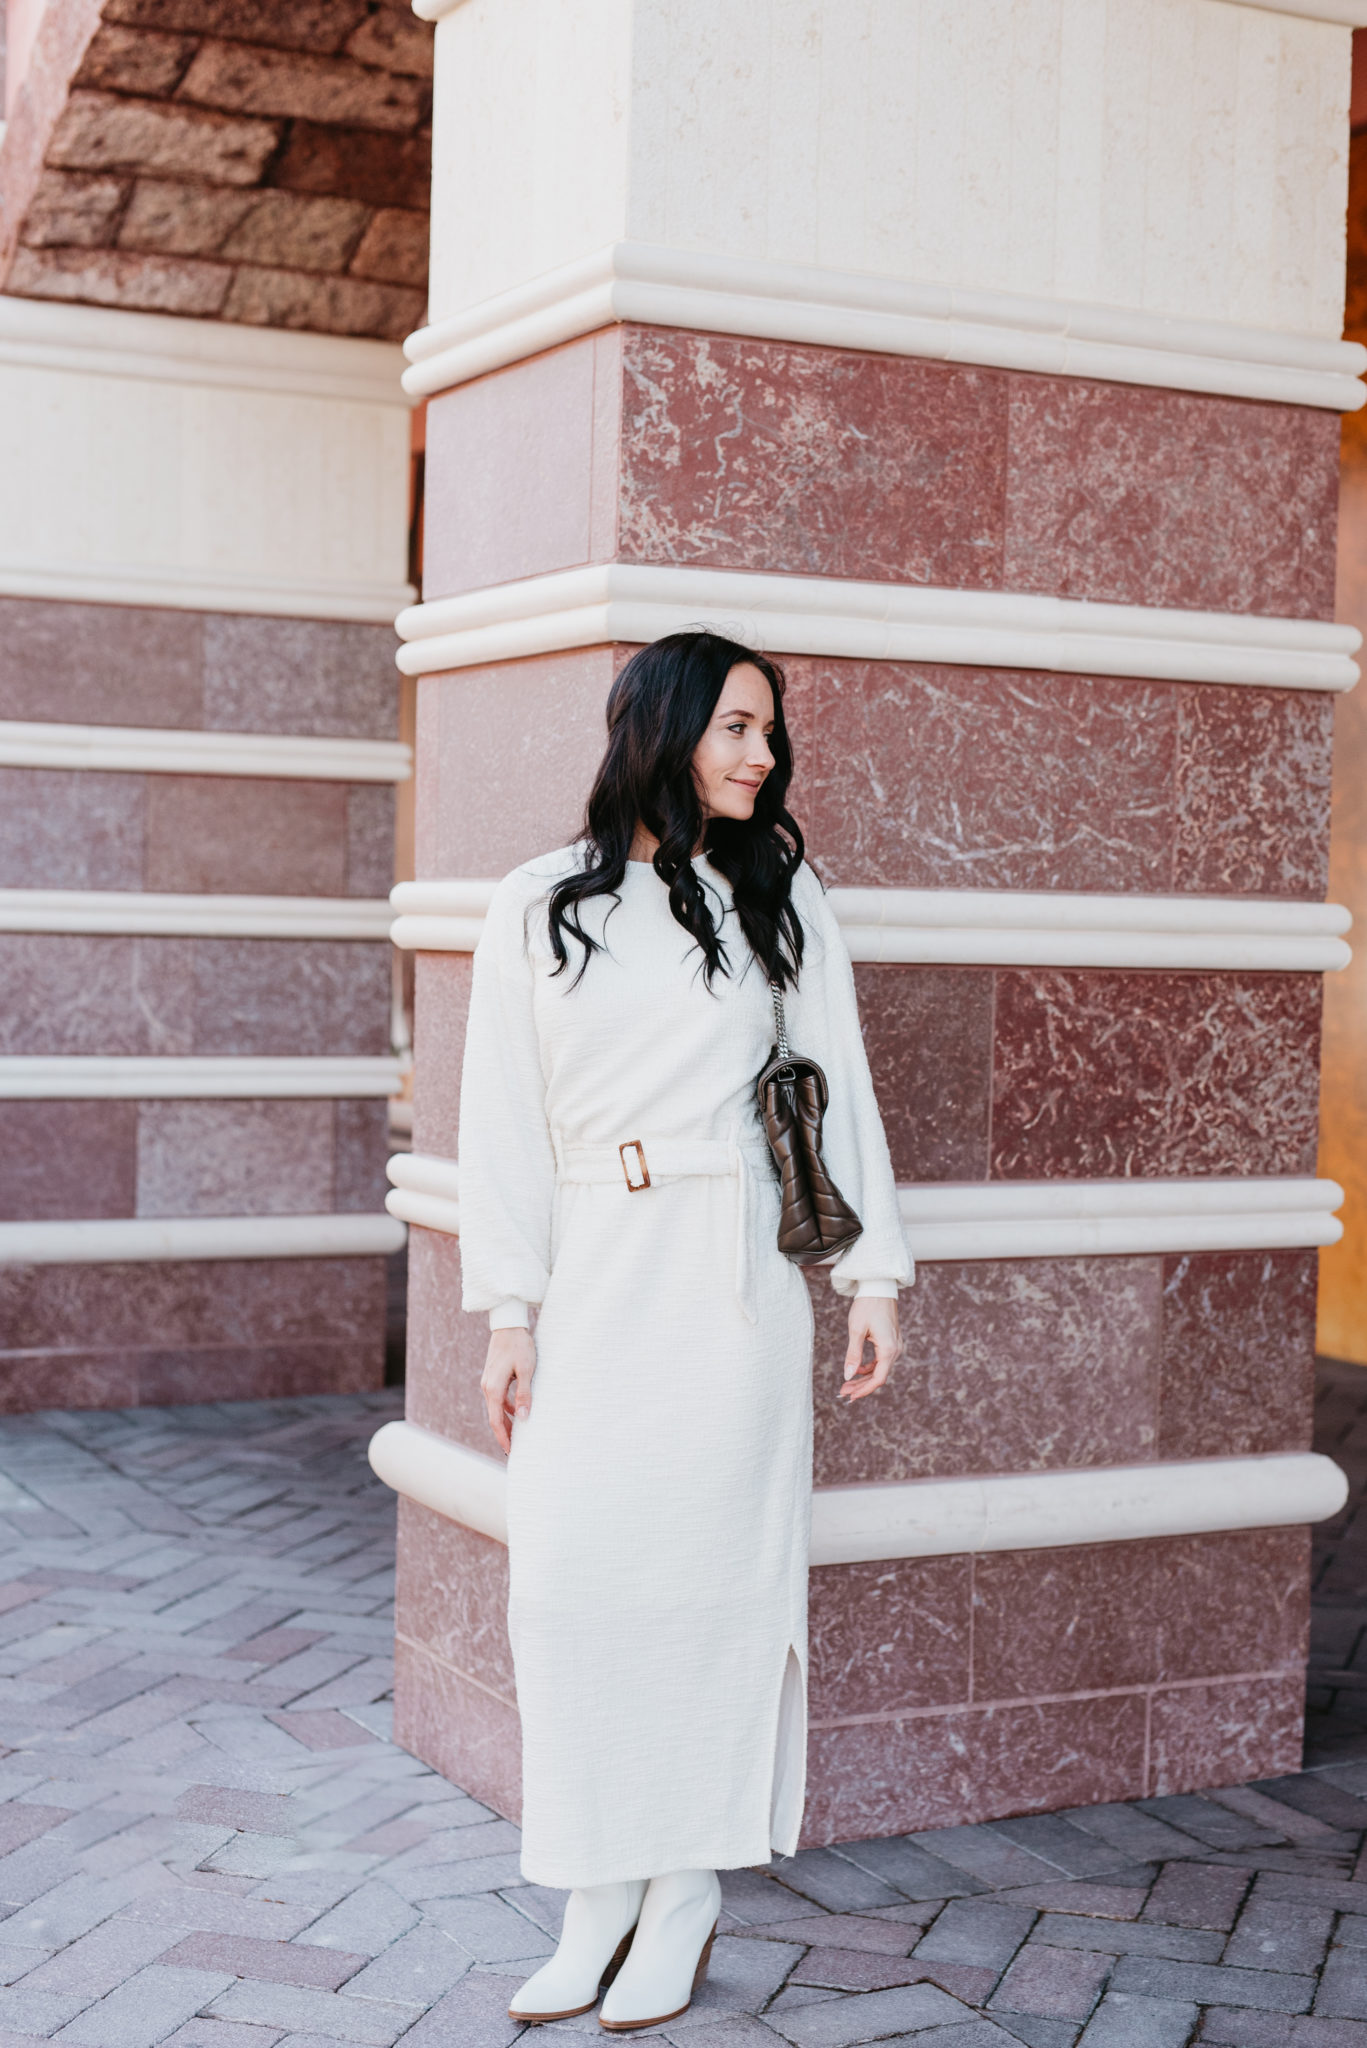 Cute Spring dress look styled by top US fashion blog, Outfits & Outings: image of a woman wearing a white Anthropologie belted dress, Yves Saint Laurent shoulder bag, and Marc Fisher white booties